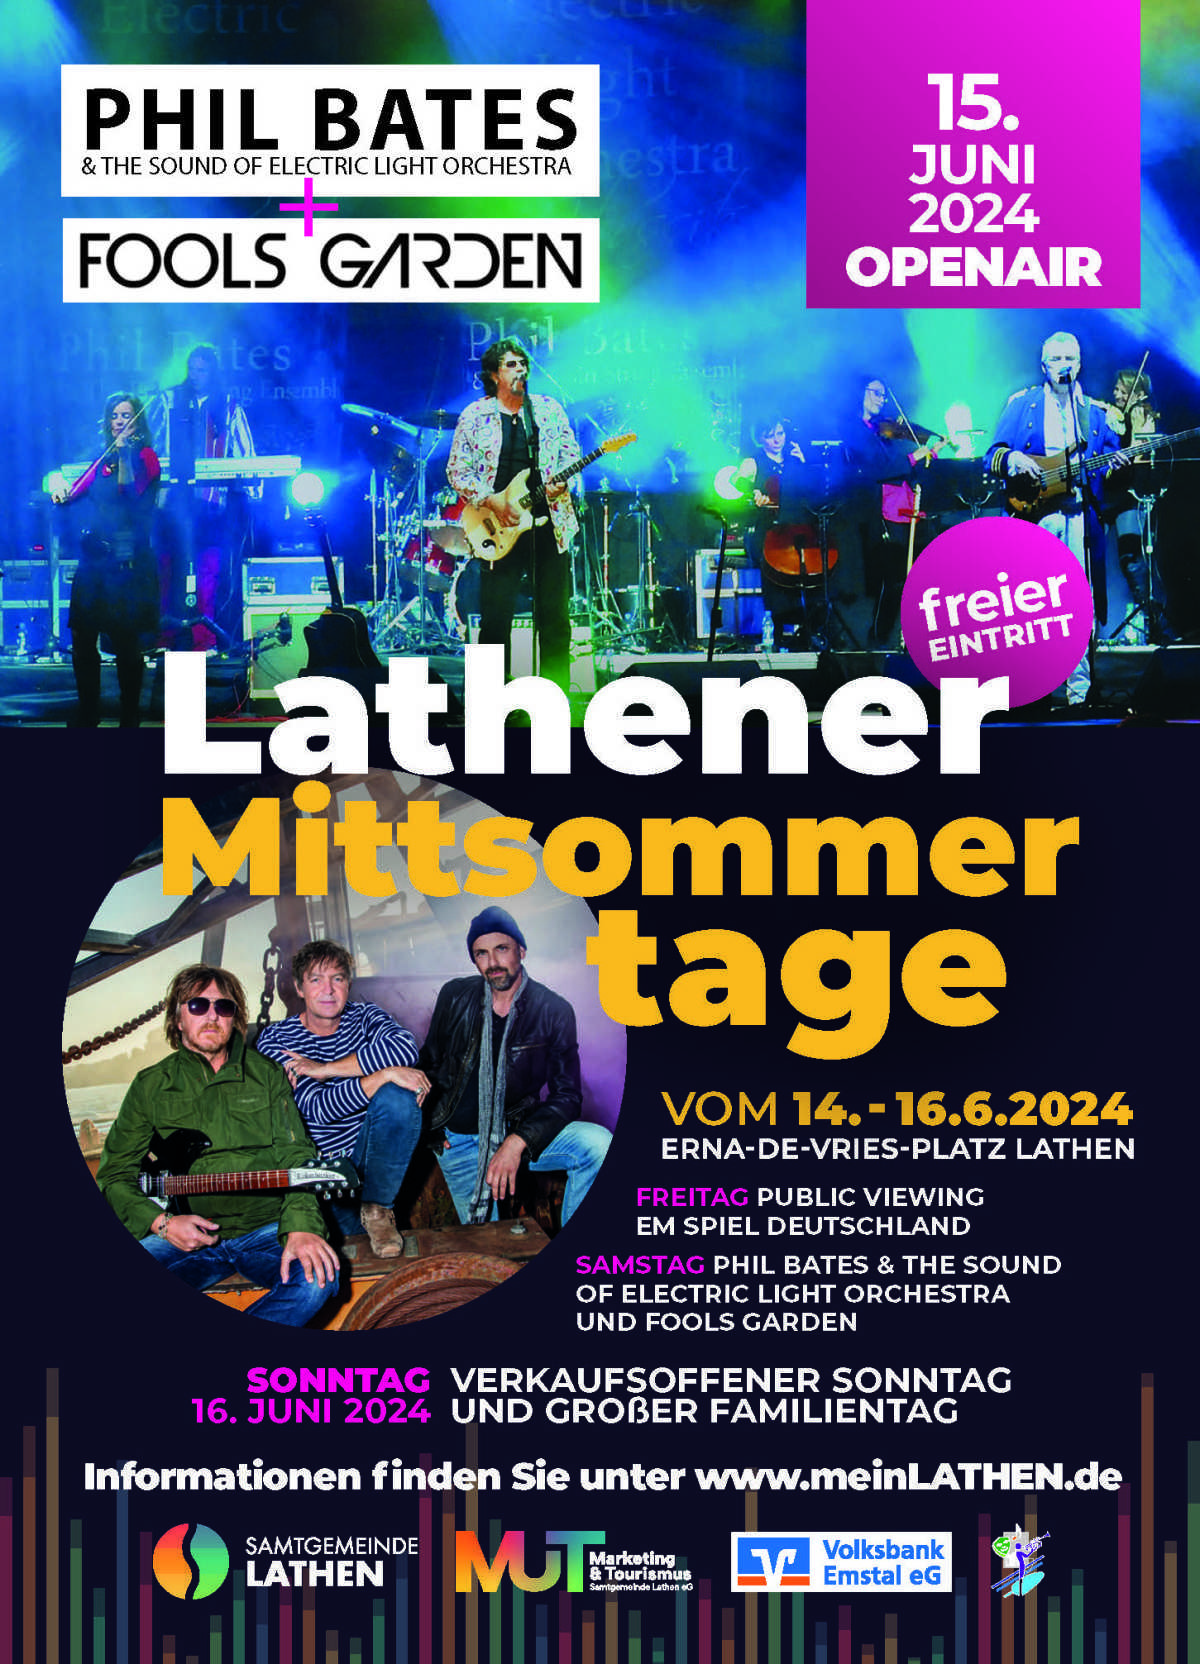 SAVE THE DATE! Mittsommertage in Lathen